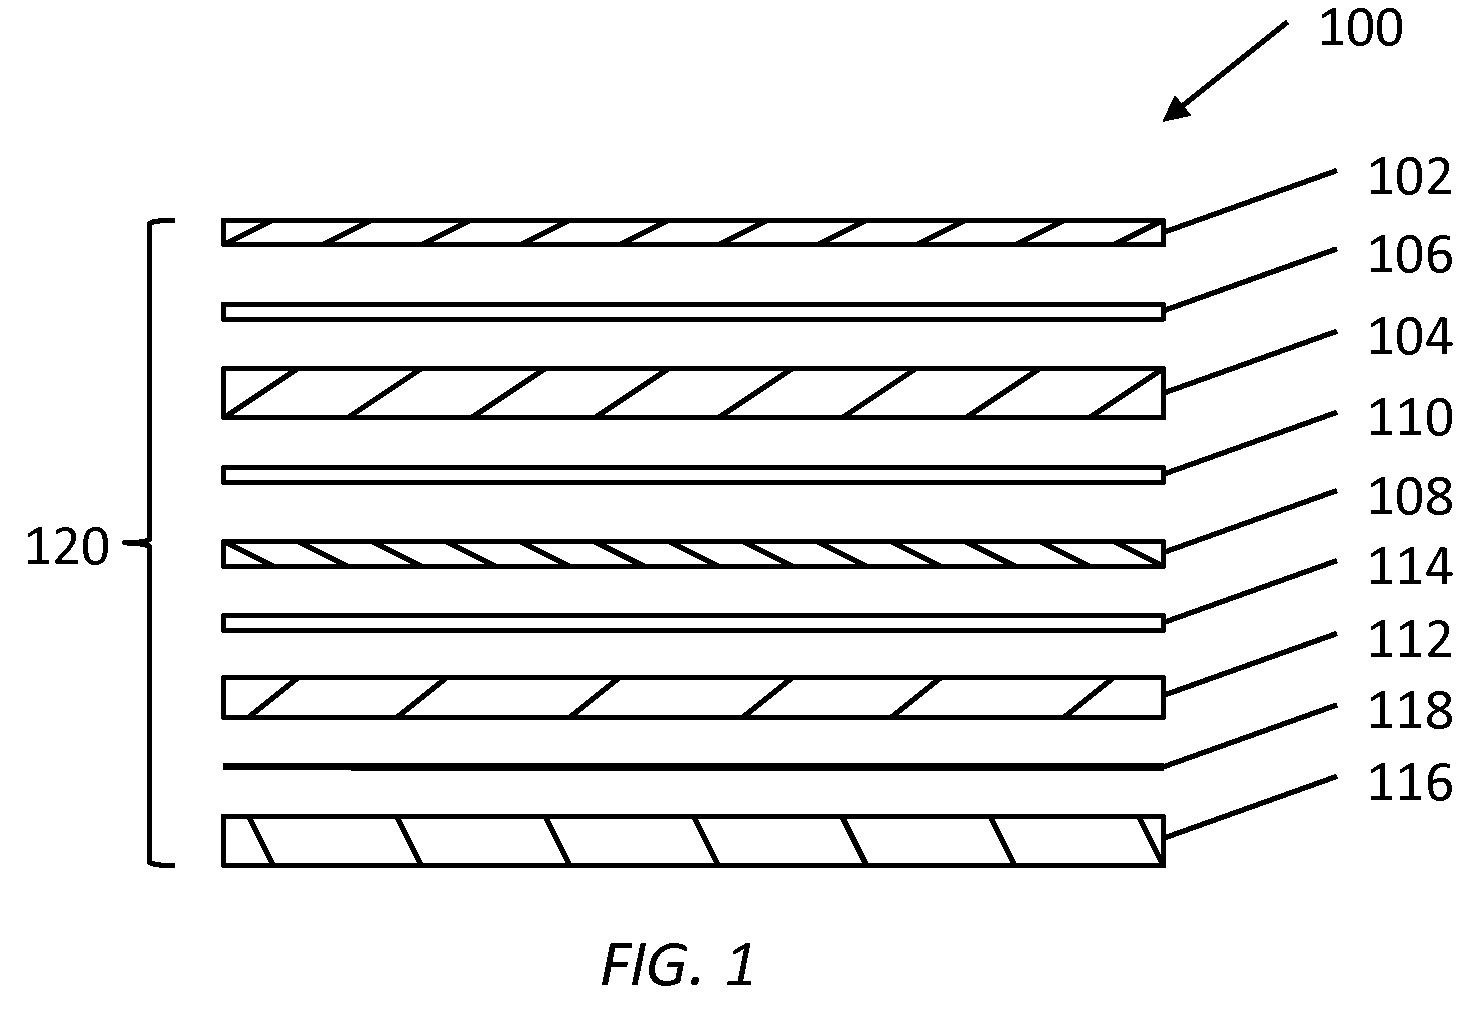 Non-glass photovoltaic module and methods for manufacture